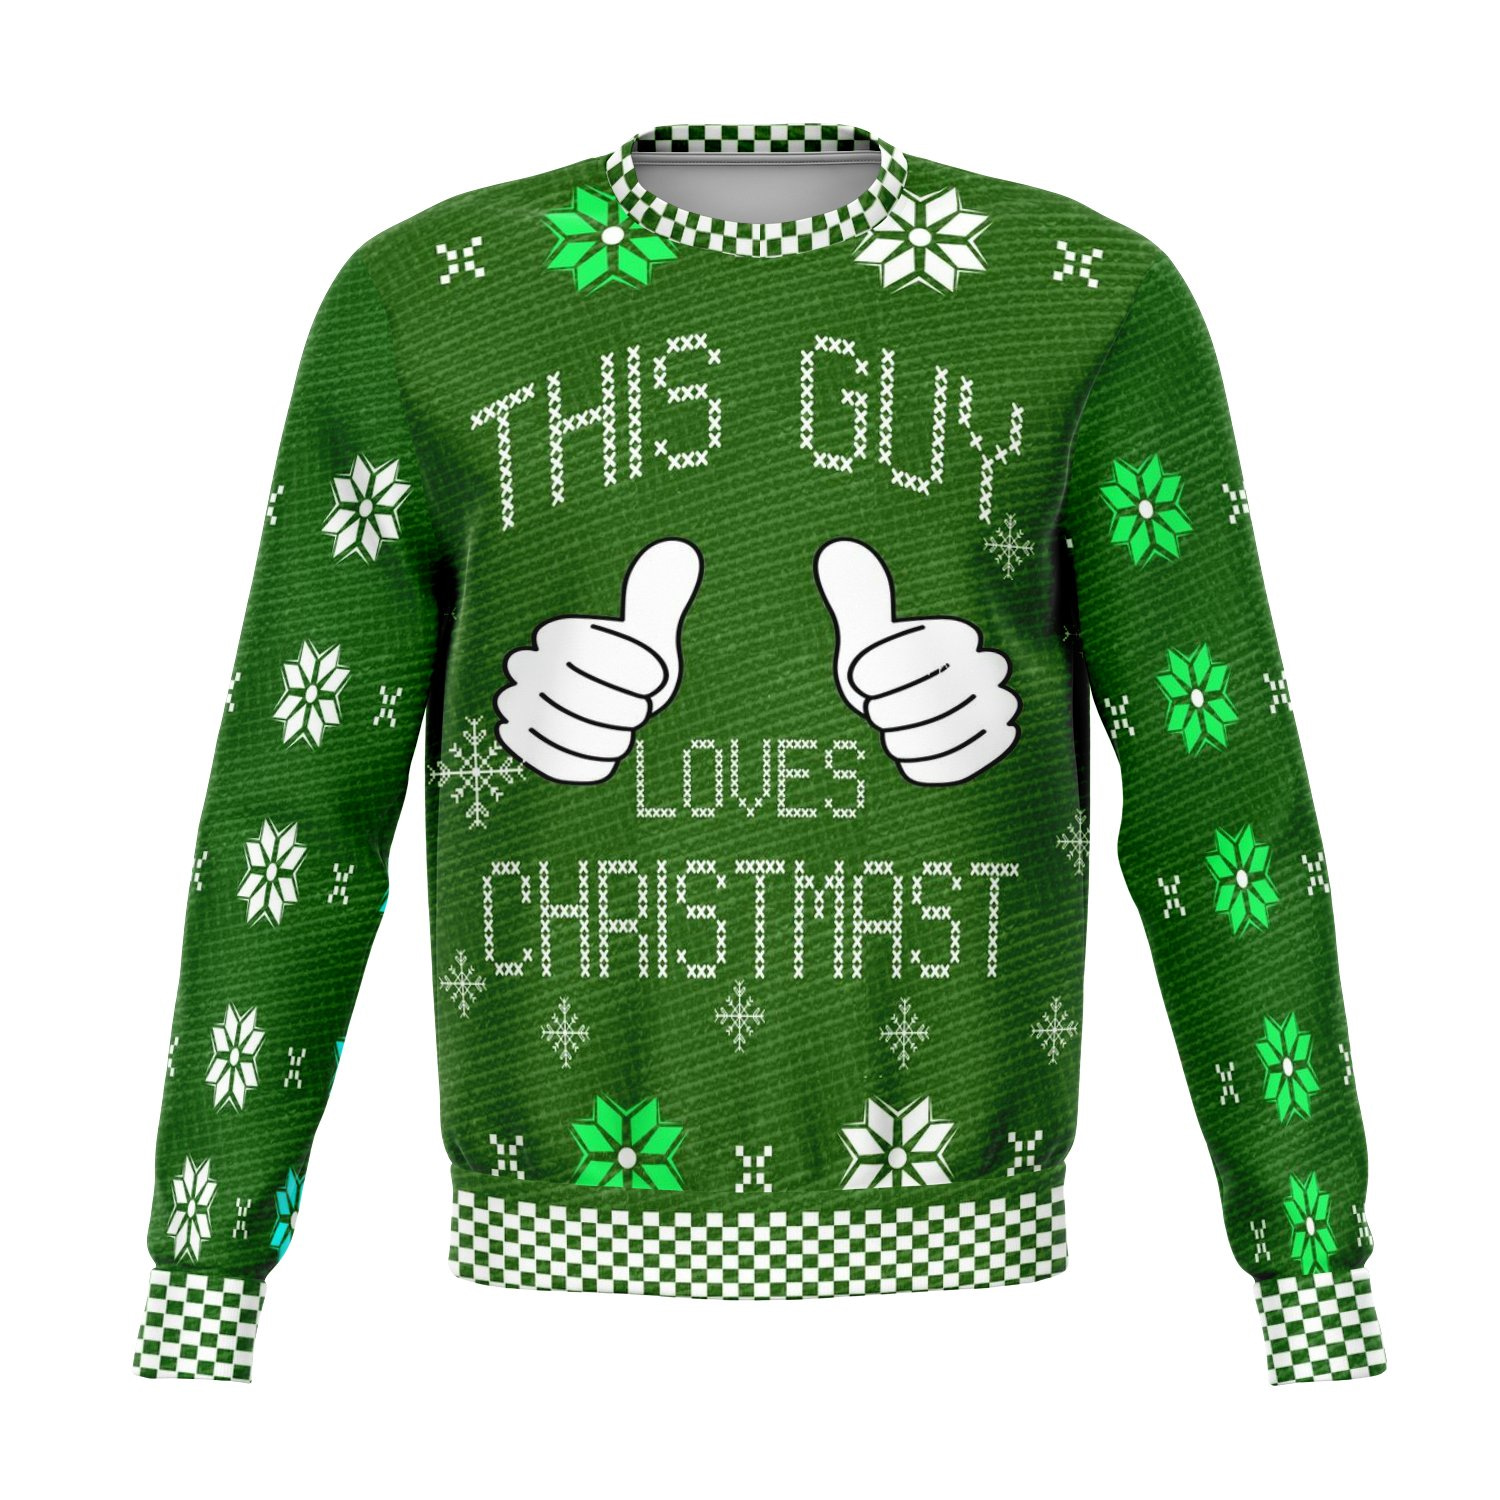 This Guy Ugly Sweater